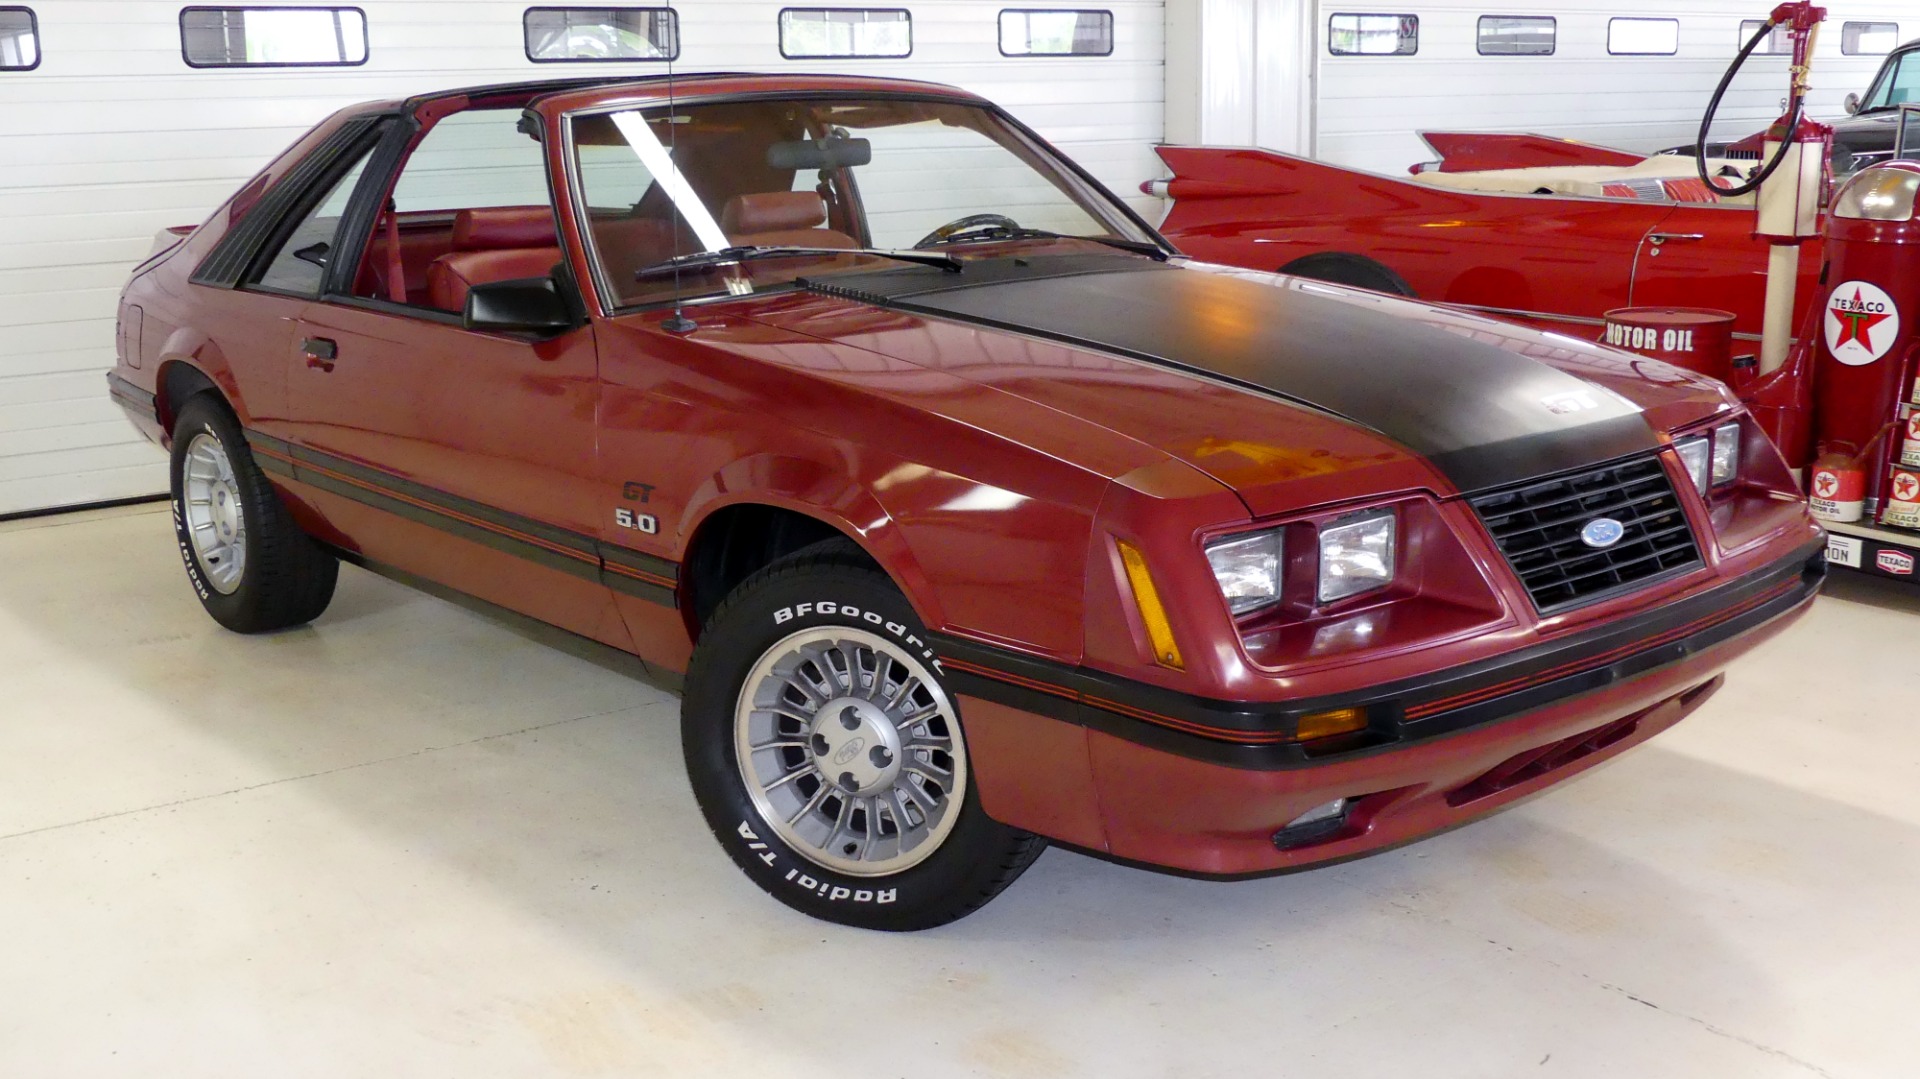 Video: 1984 Ford Mustang GT Quick Tour